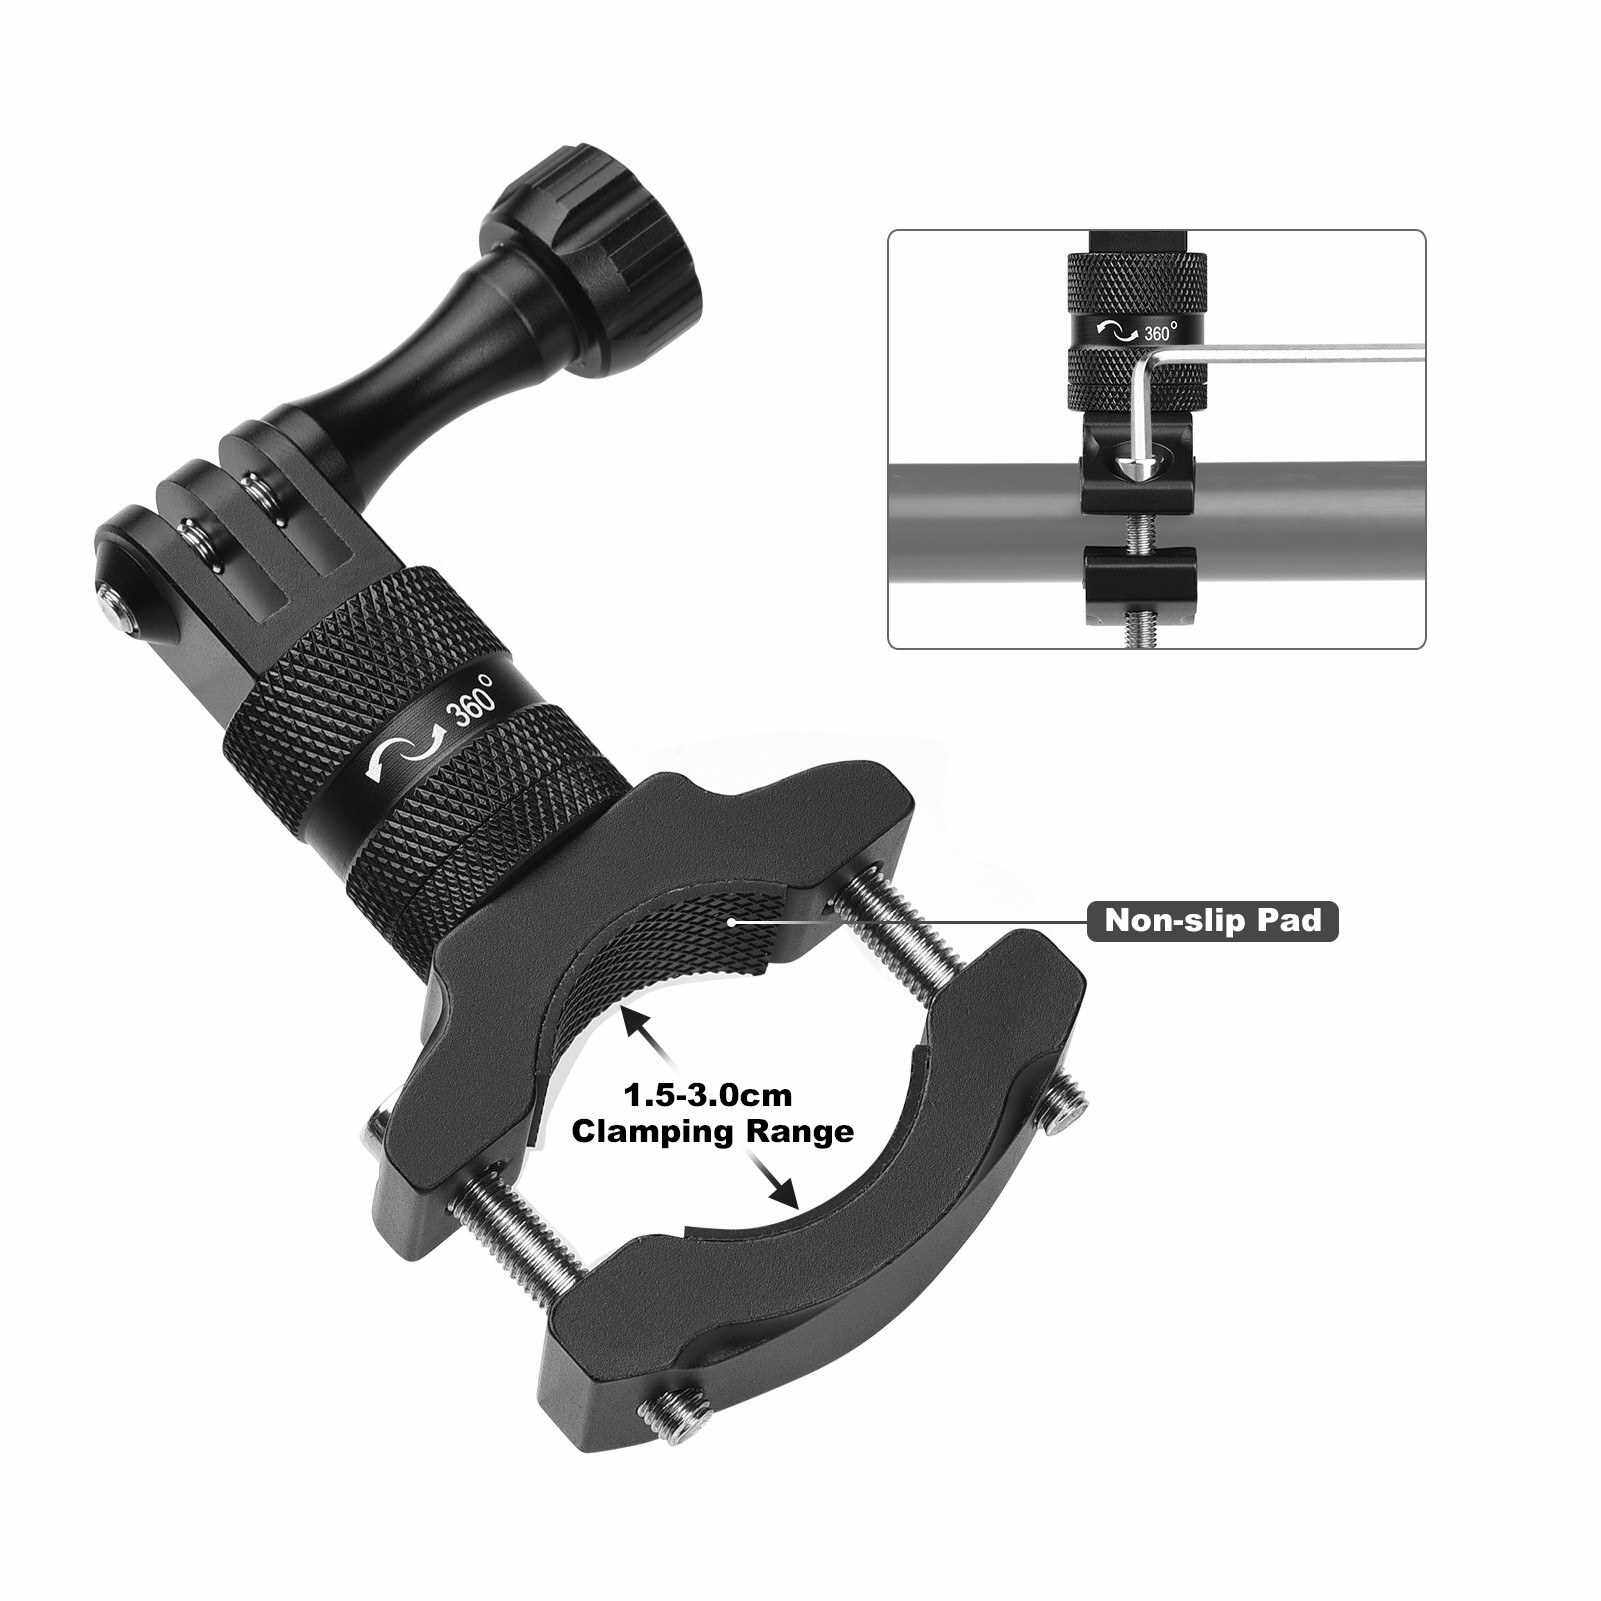 Aluminium Alloy Bike Bicycle Handlebar Mount Holder 360 Degrees Rotary Camera Mount Accessories Replacement for Gopro Hero 9/8/7/6/5/4 SJCAM YI DJI Osmo & Other Action Camera (Standard)